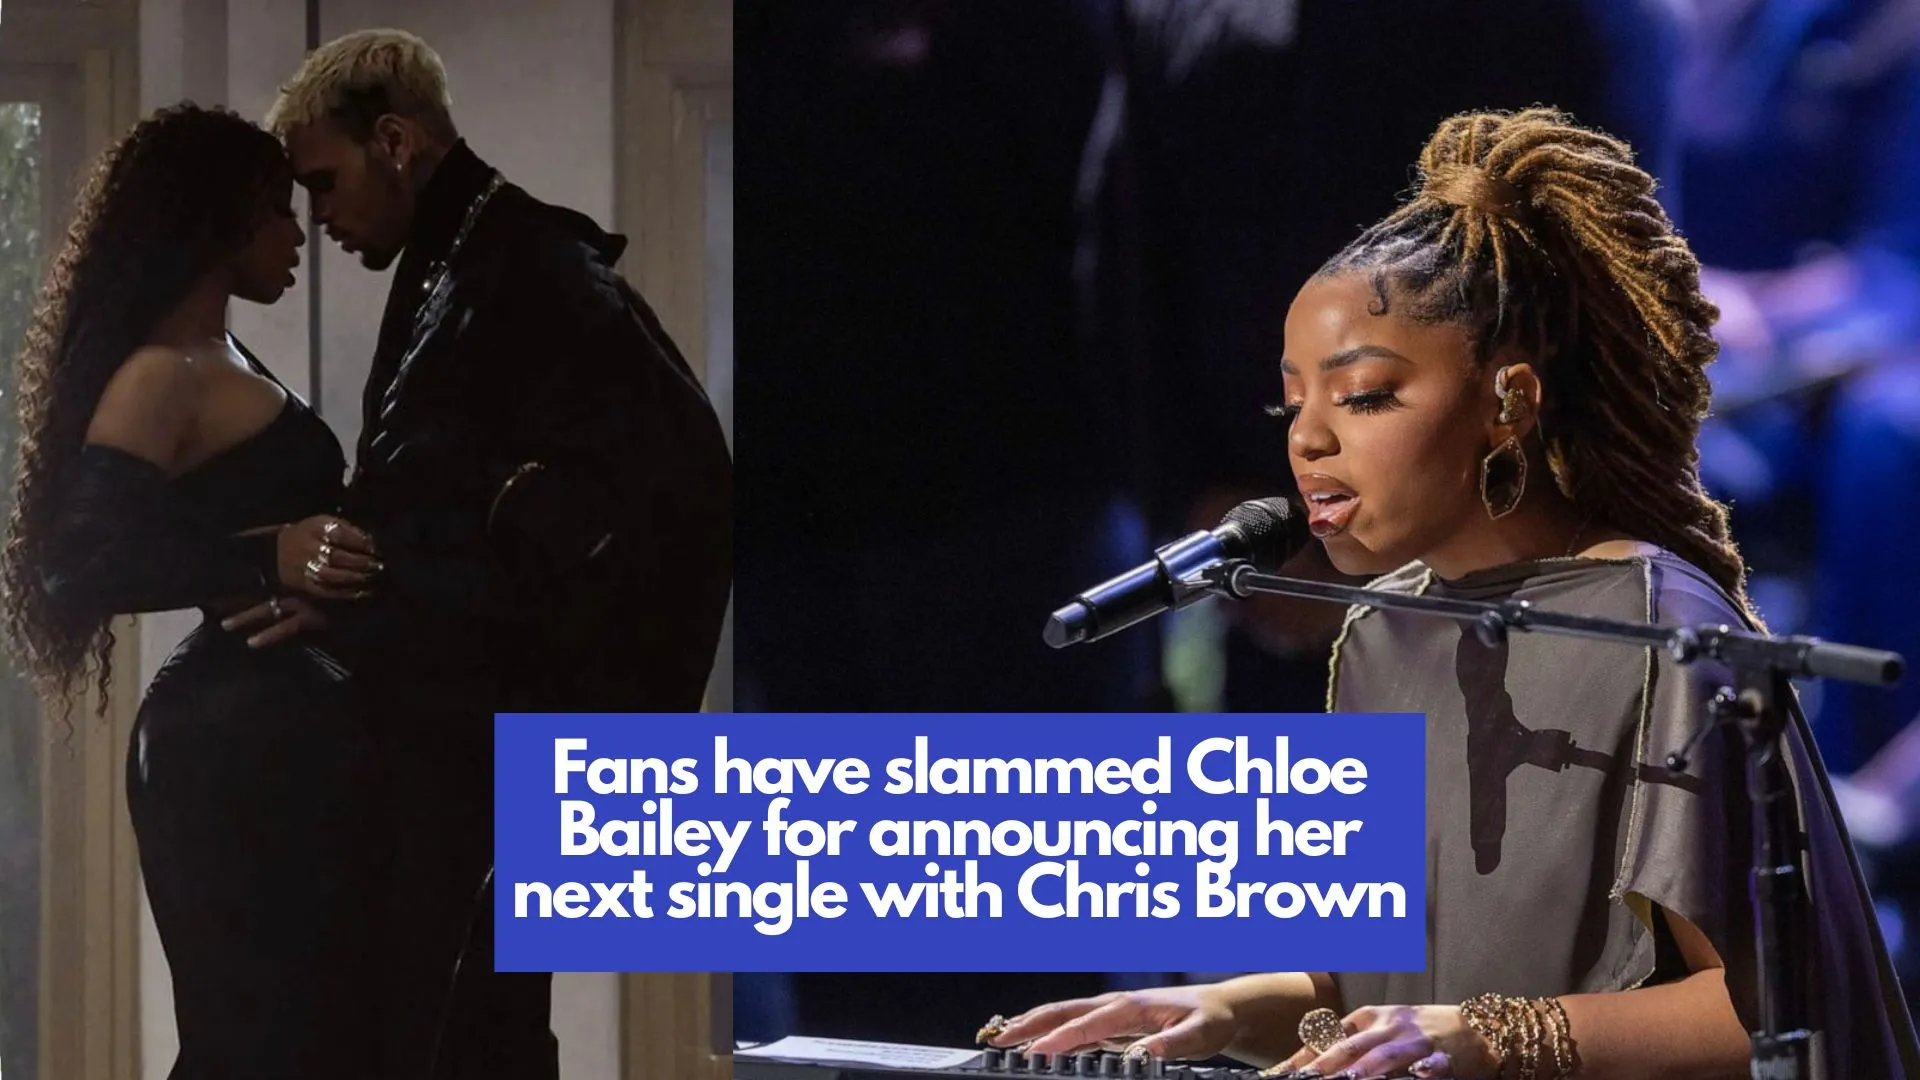 Fans have slammed Chloe Bailey for announcing her next single with Chris Brown